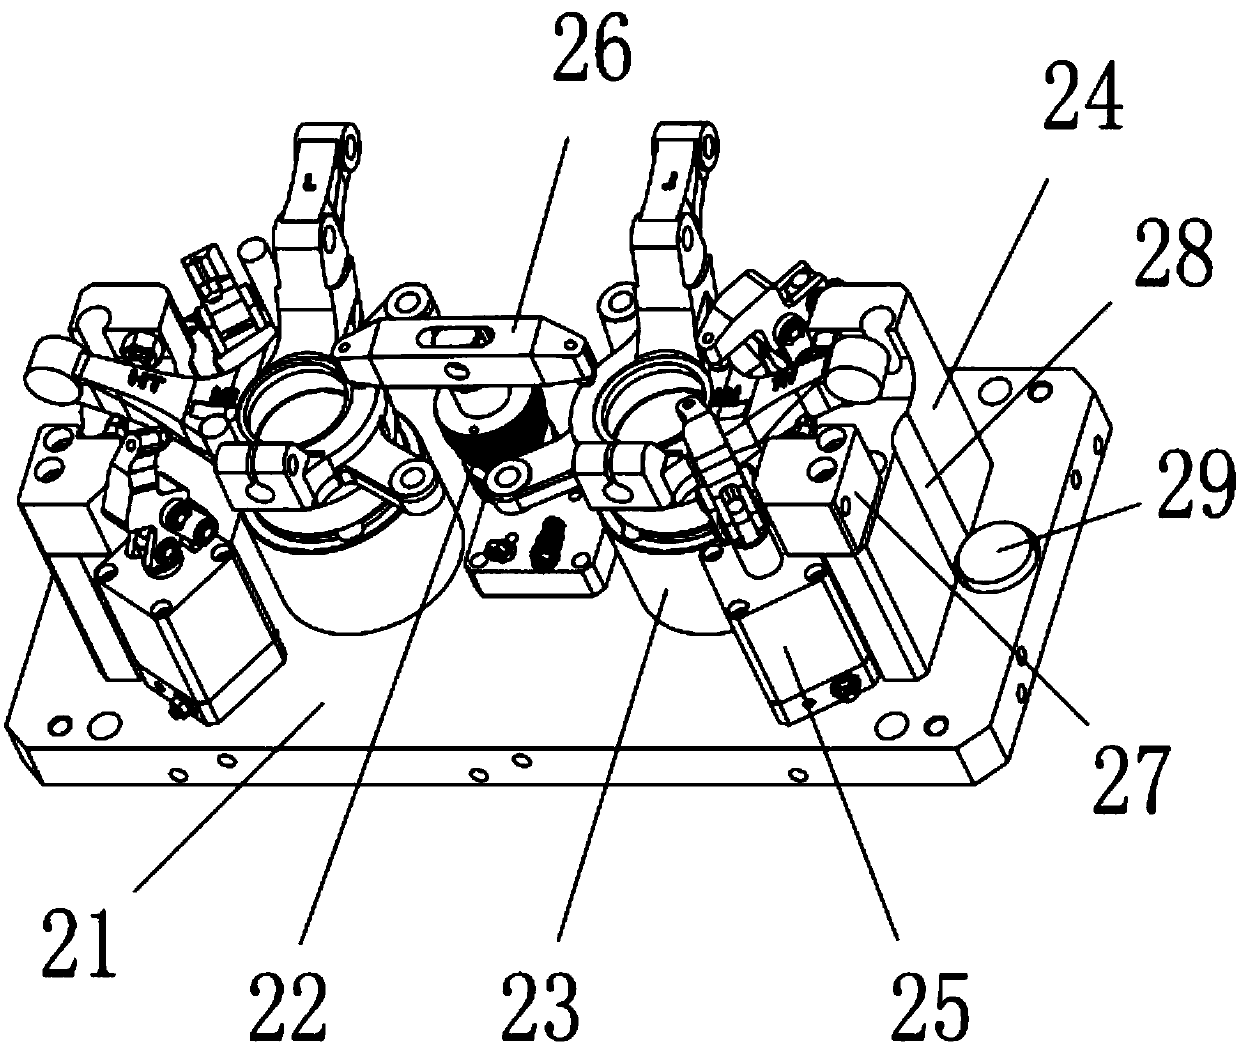 Reverse clamping rotating workbench assembly for steering knuckle